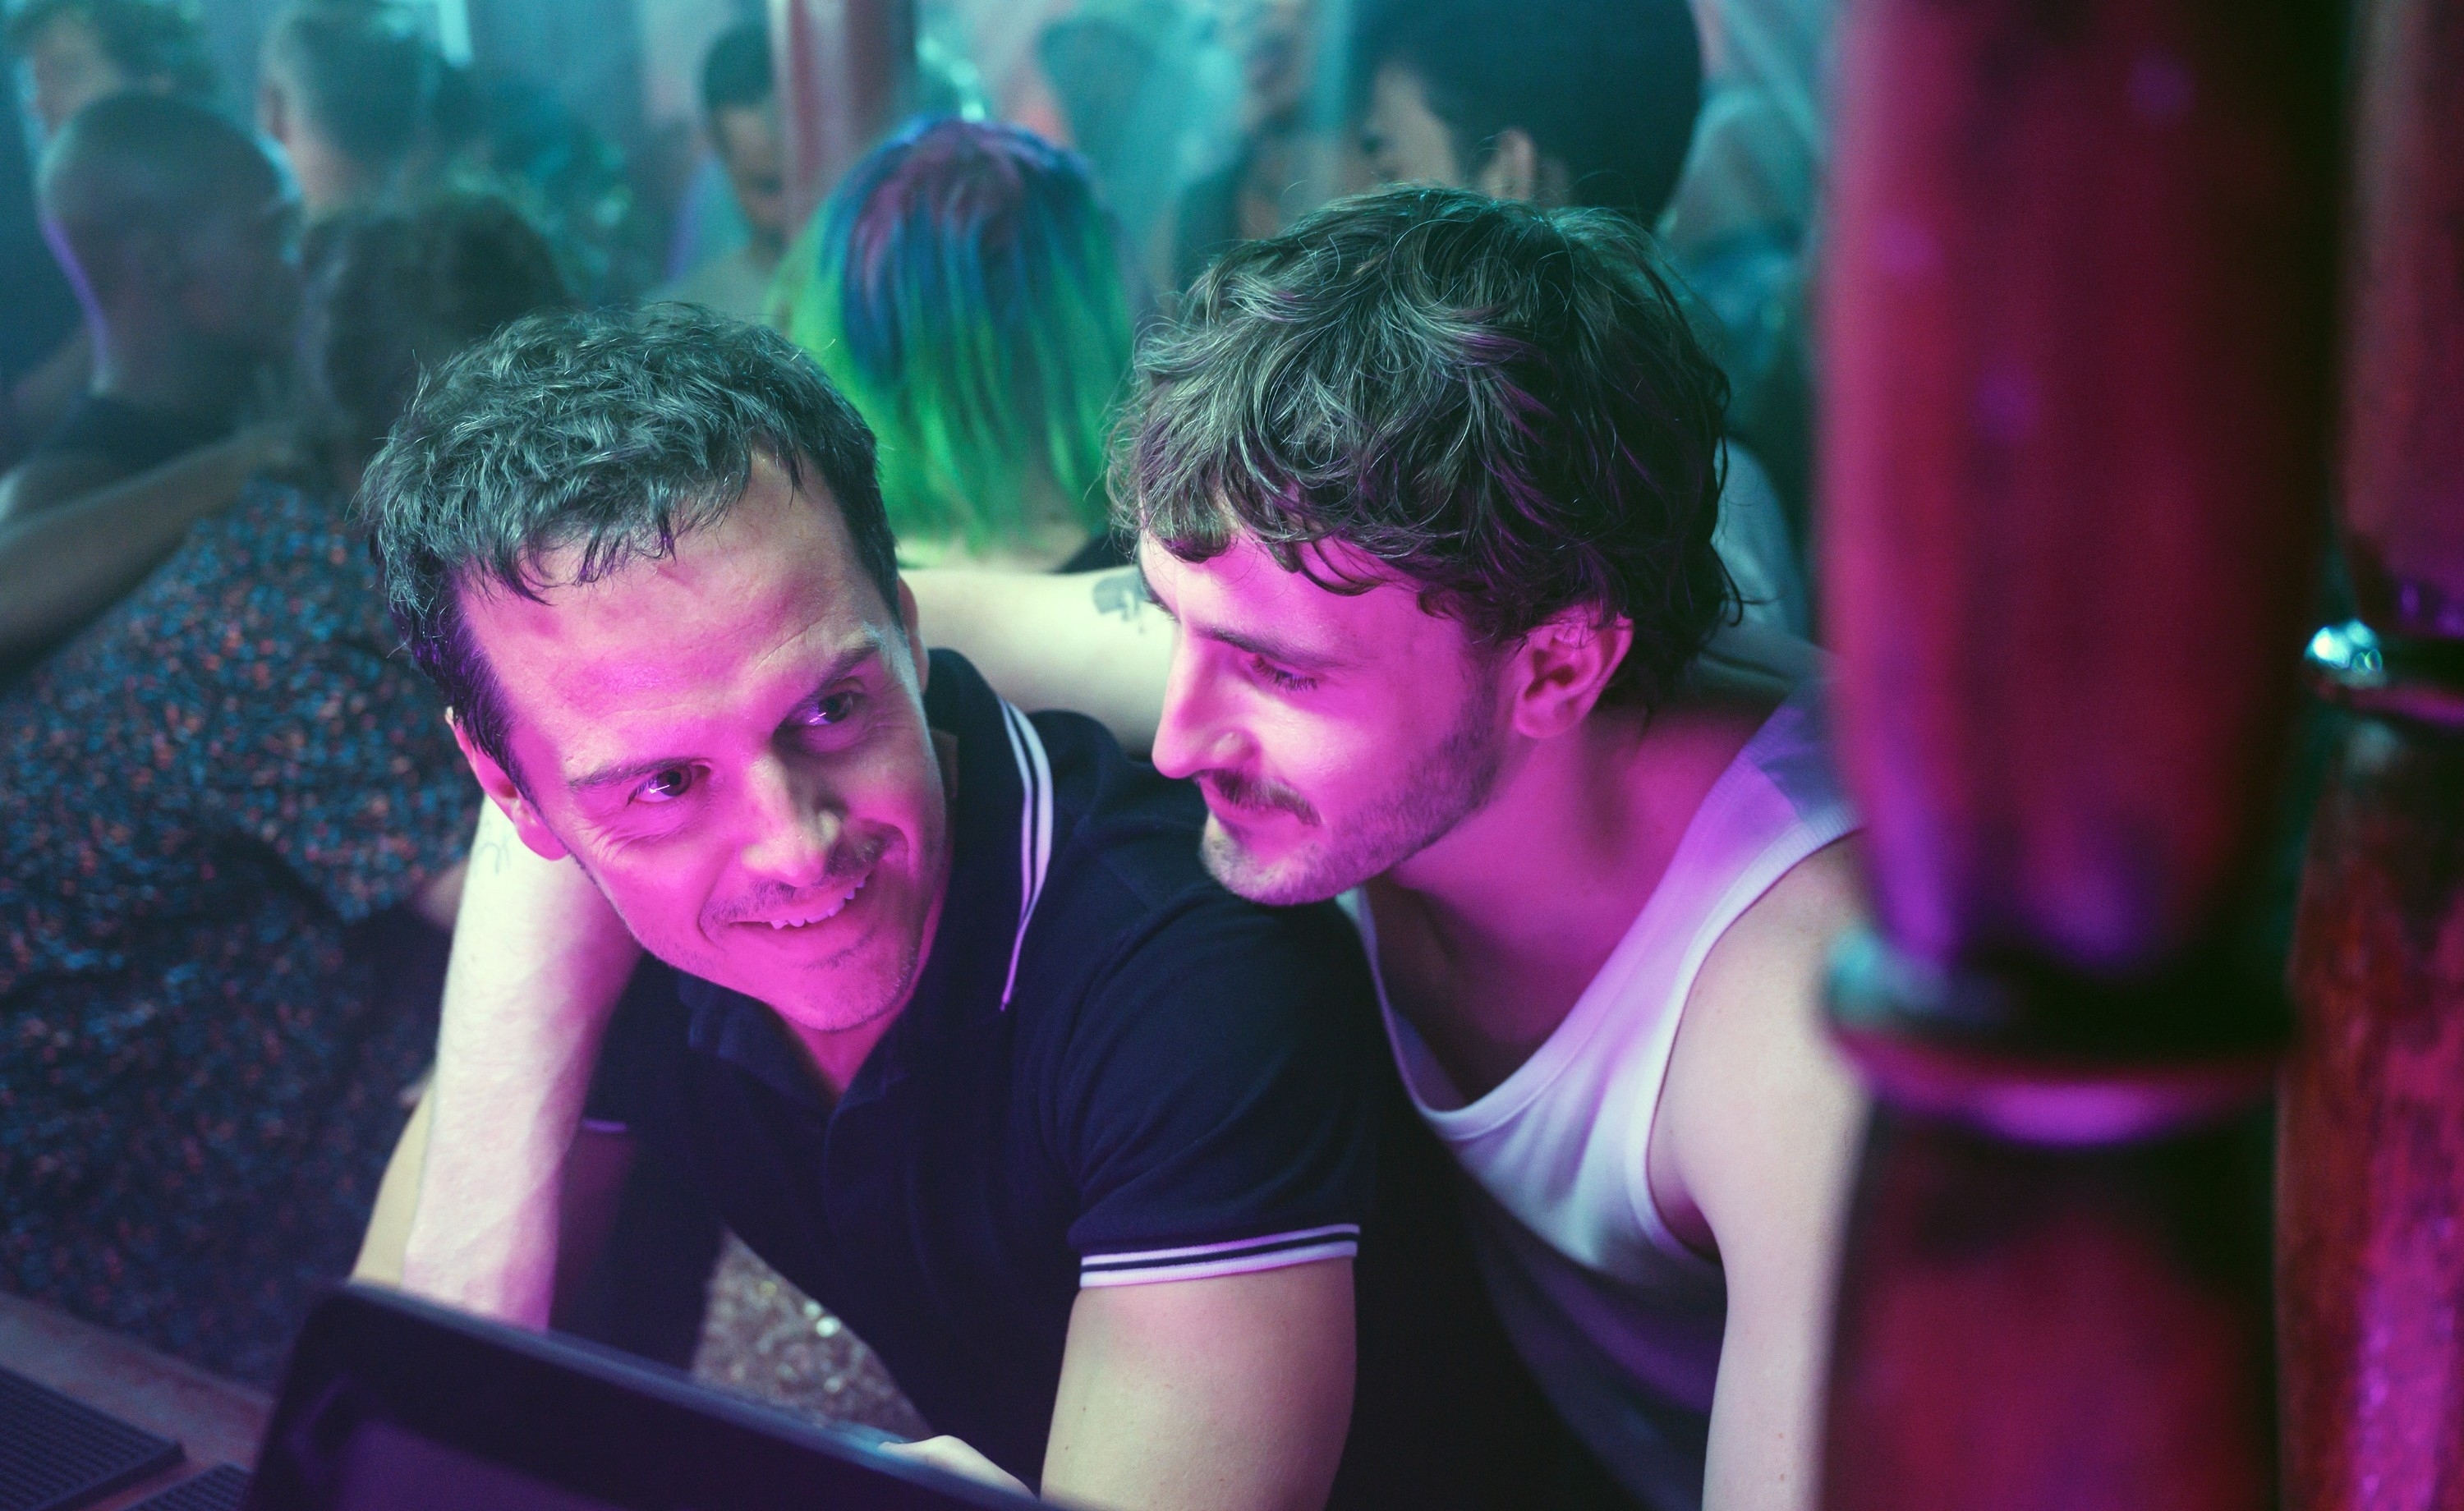 Andrew Scott and Paul Mescal leaning close, sharing a moment in a crowded setting